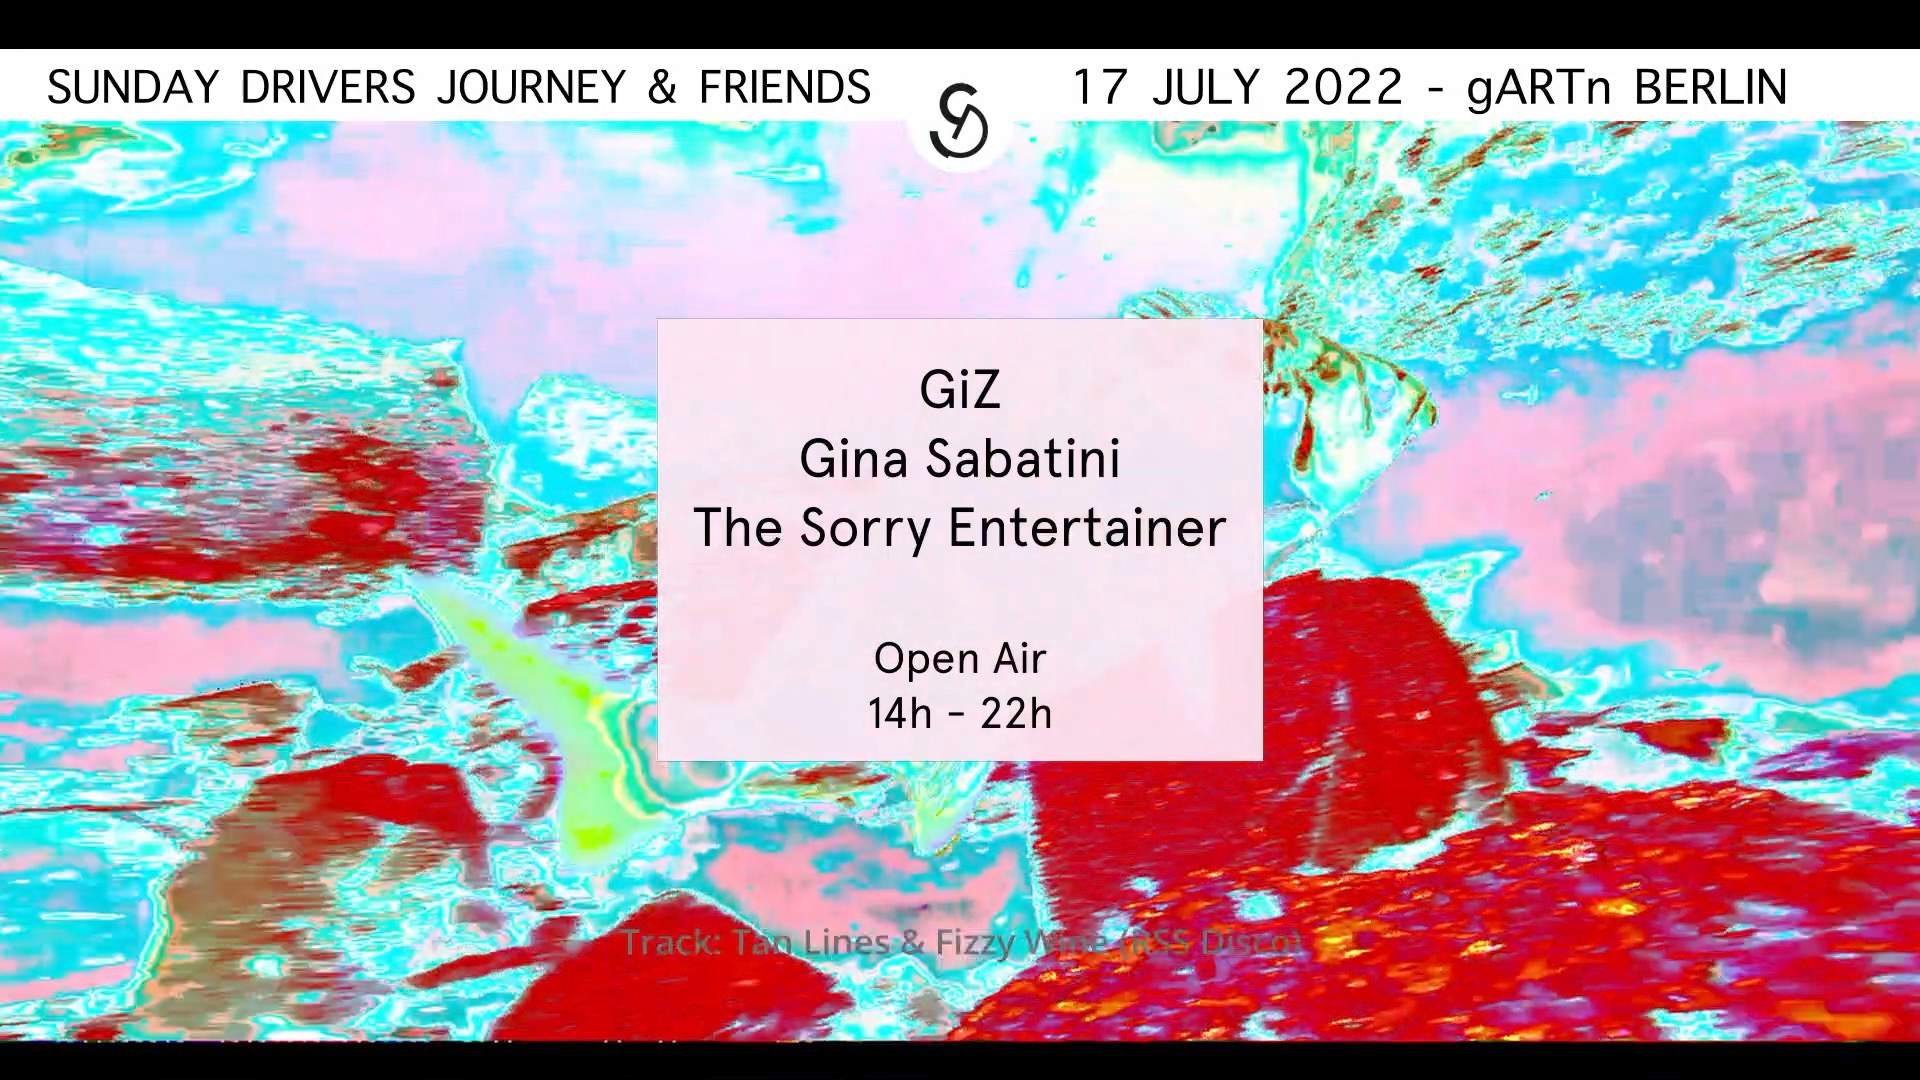 Sunday Drivers Journey with The Sorry Entertainer, GiZ and Gina Sabatini - Página frontal